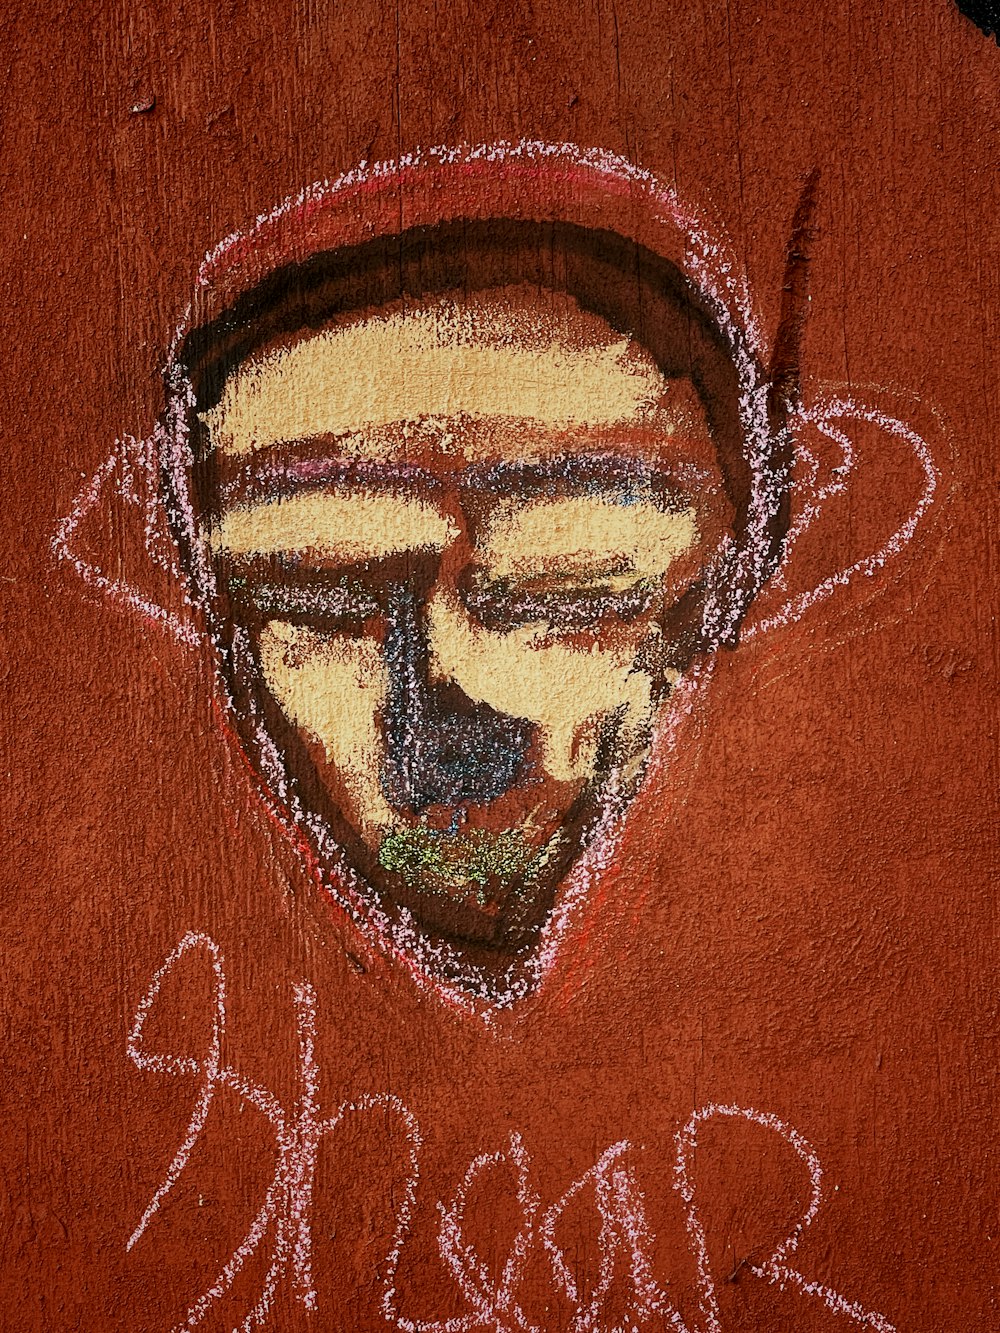 a drawing of a man's face on a red shirt